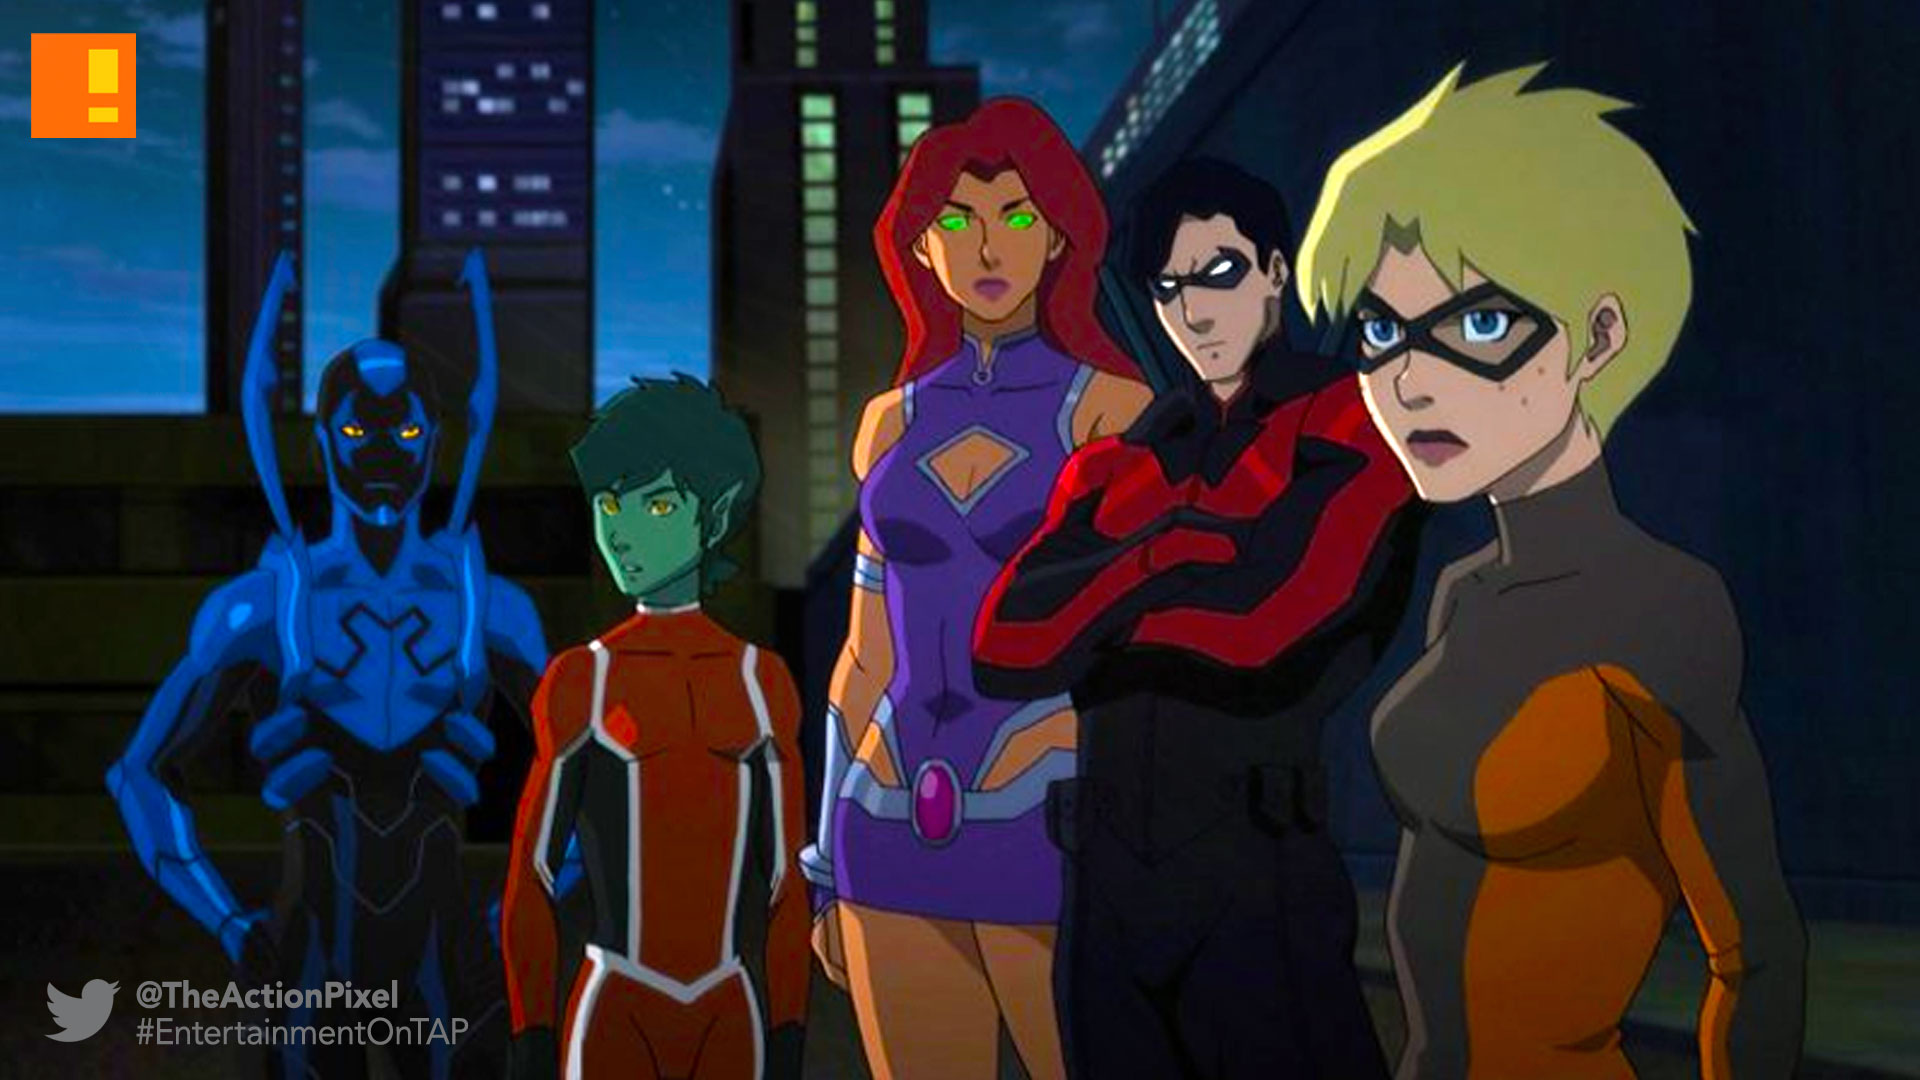 teen titans, judas contract, the action pixel, entertainment on tap, the action pixel, wb animation, warner bros., dc comics.